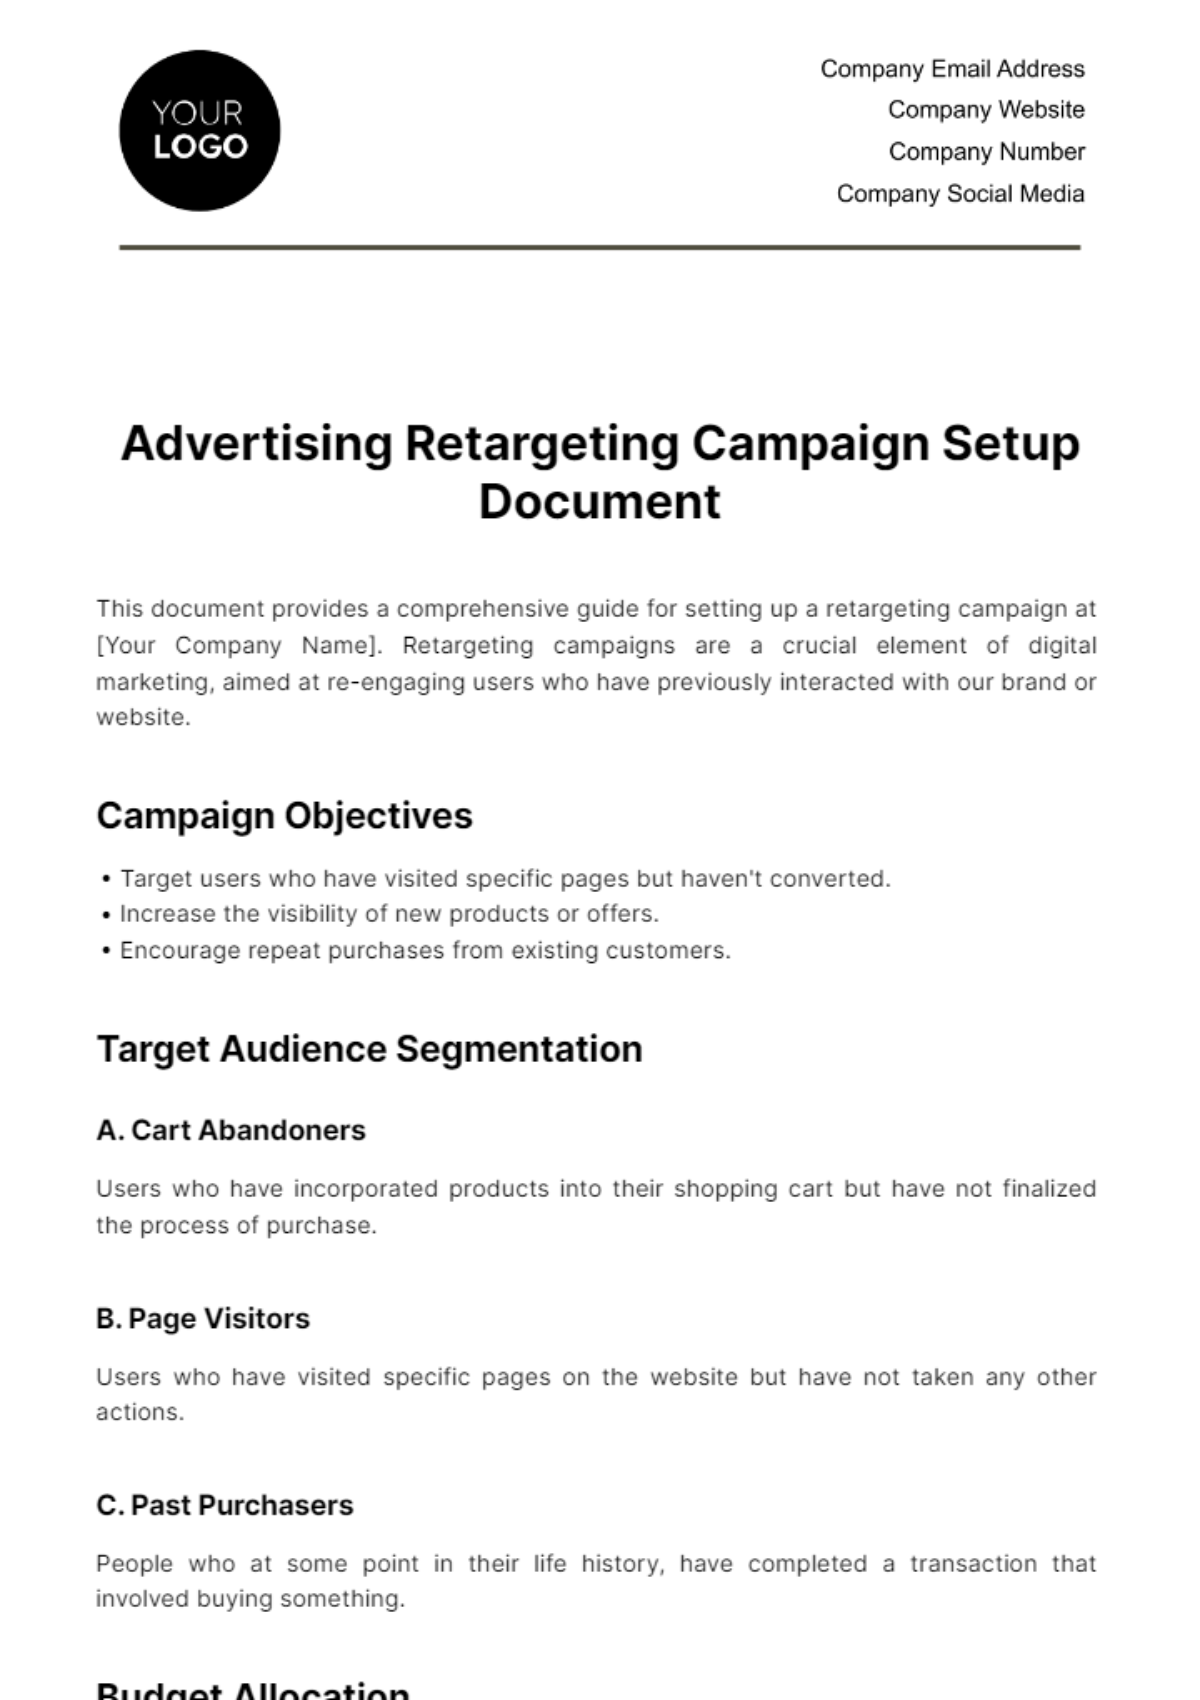 Free Advertising Retargeting Campaign Setup Document Template